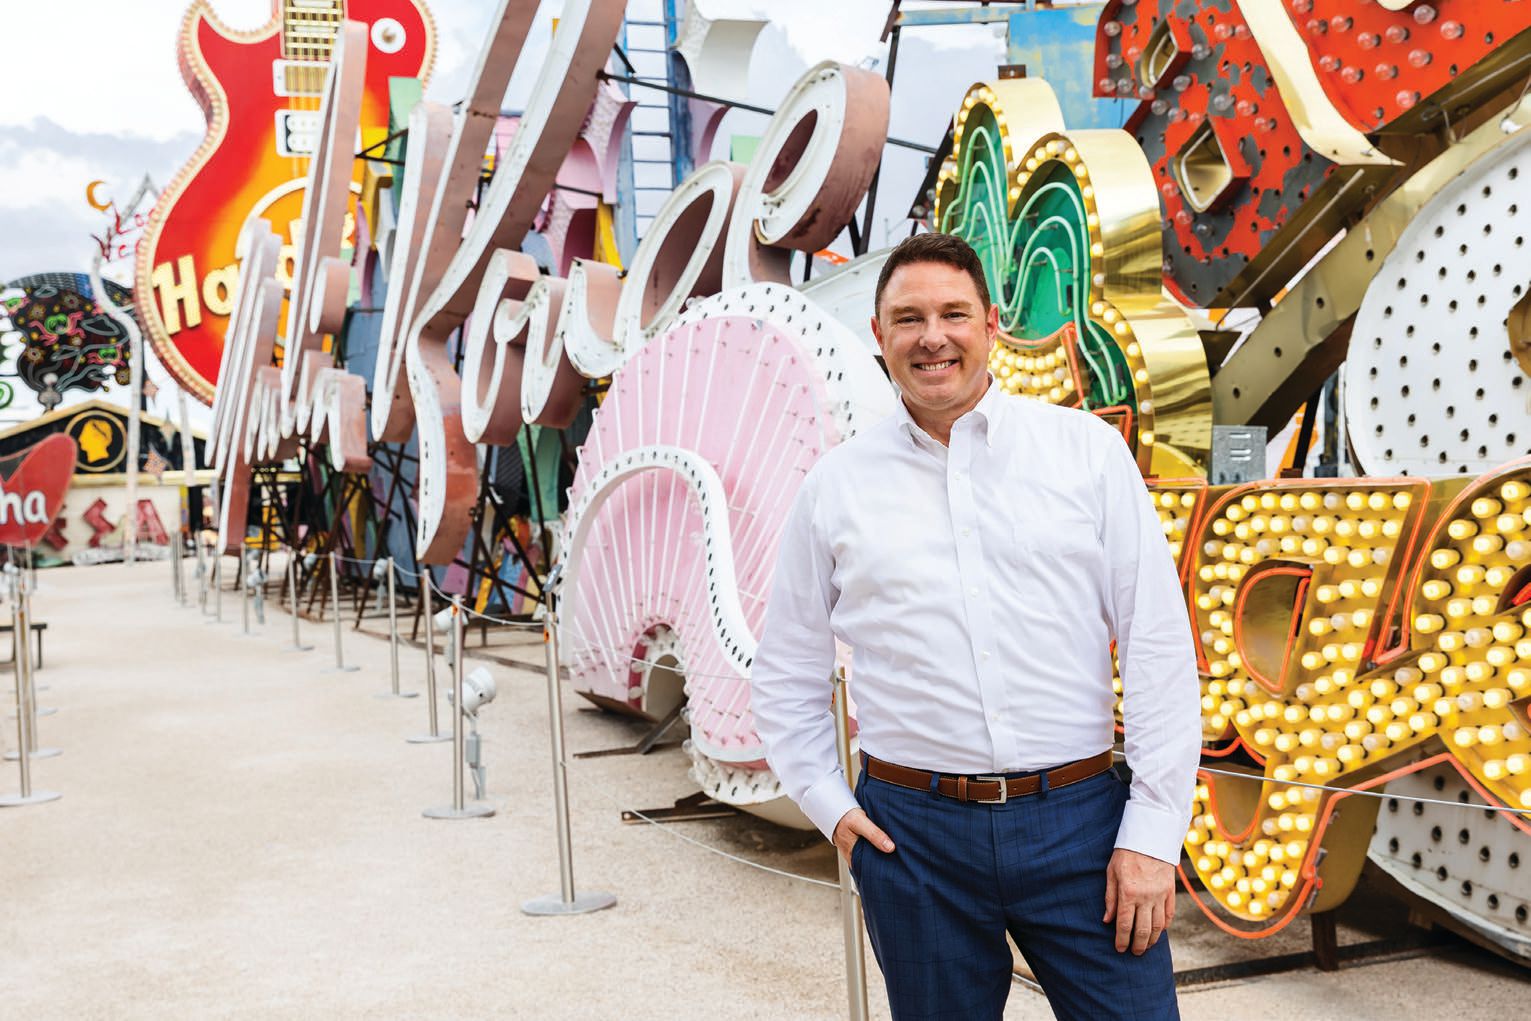 “For sheer impact, my favorite piece at The Neon Museum has to be the Hard Rock Café guitar,” says Aaron Berger. “Standing at over 80 feet tall, this piece towers over the Boneyard.” PHOTO COURTESY OF THE NEON MUSEUM